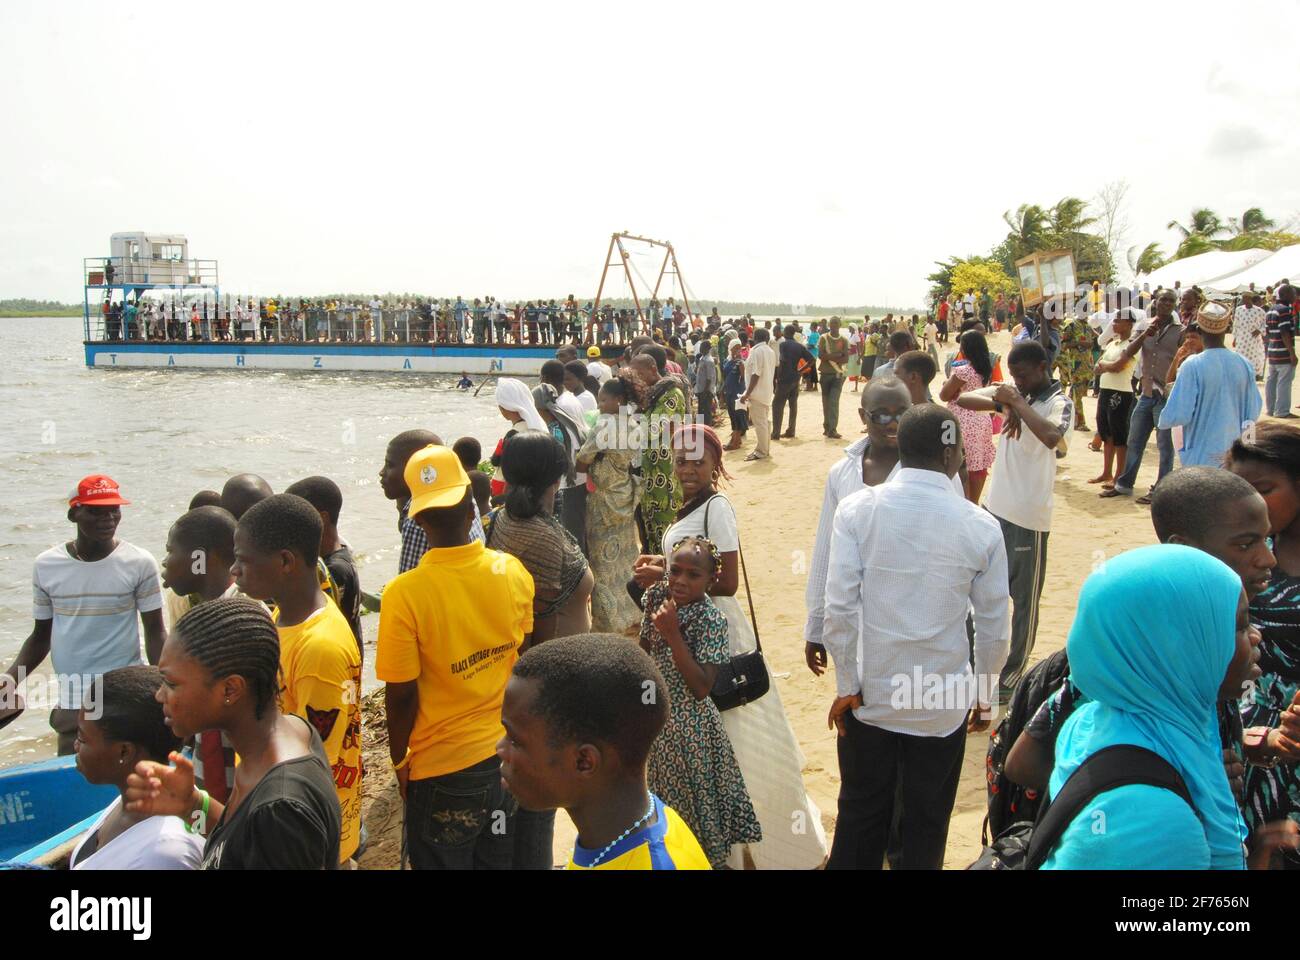 People watching an arc used during slave trade in Badagry, Lagos, Nigeria. Stock Photo